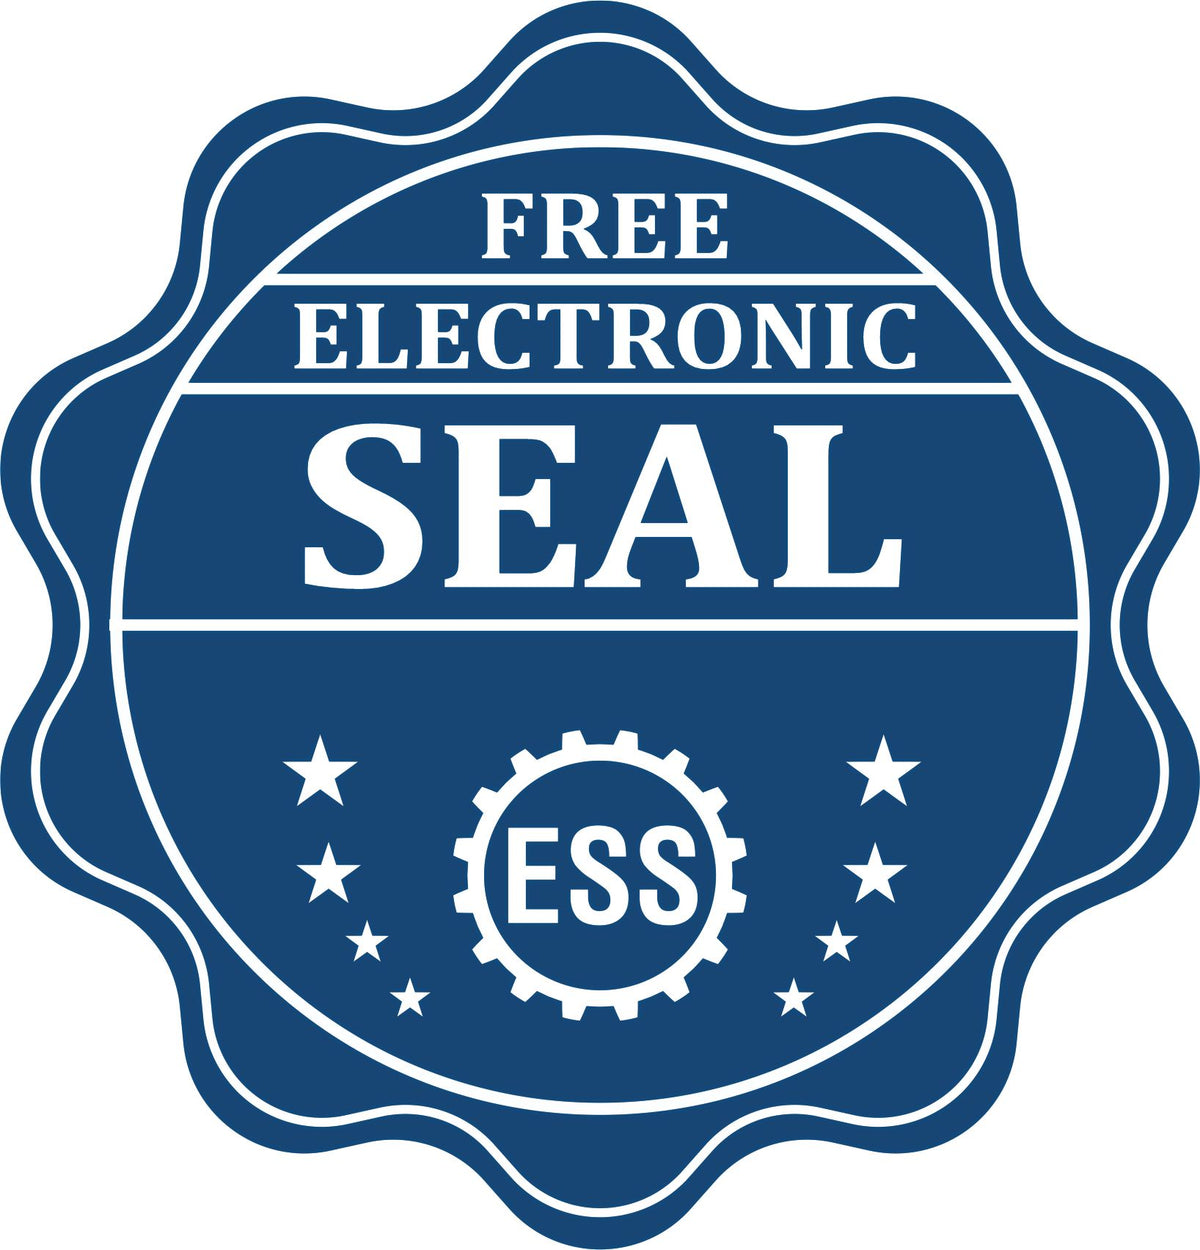 A badge showing a free electronic seal for the Hybrid Oklahoma Architect Seal with stars and the ESS gear on the emblem.